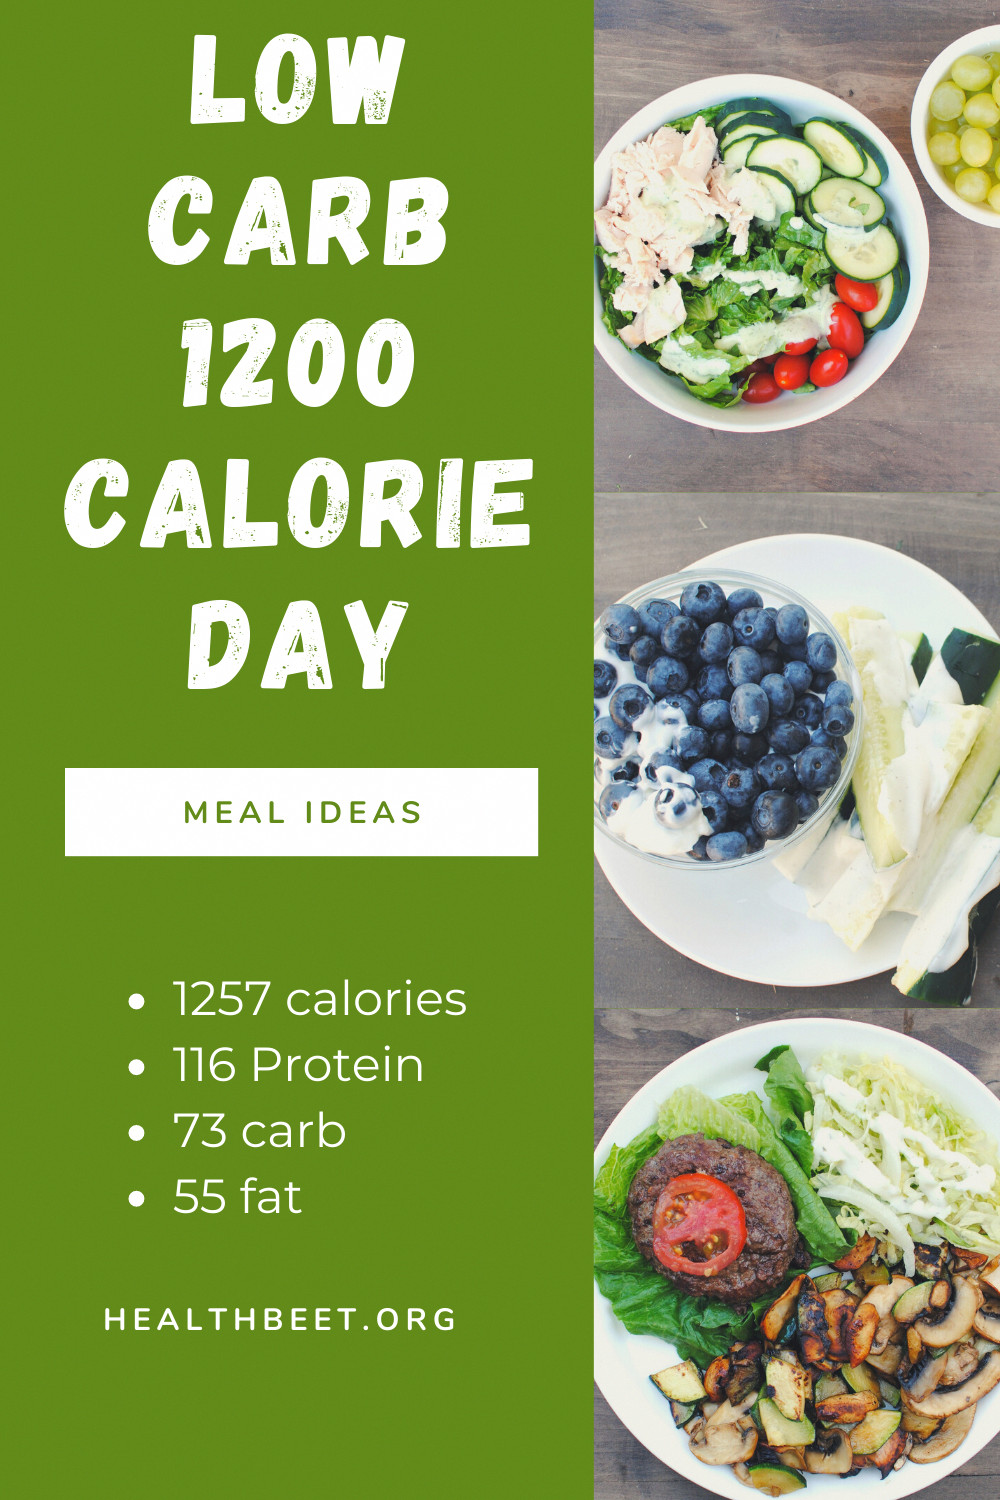 Very Low Calorie Diet Recipes
 Low carb meal ideas for 1200 calories Delicious and